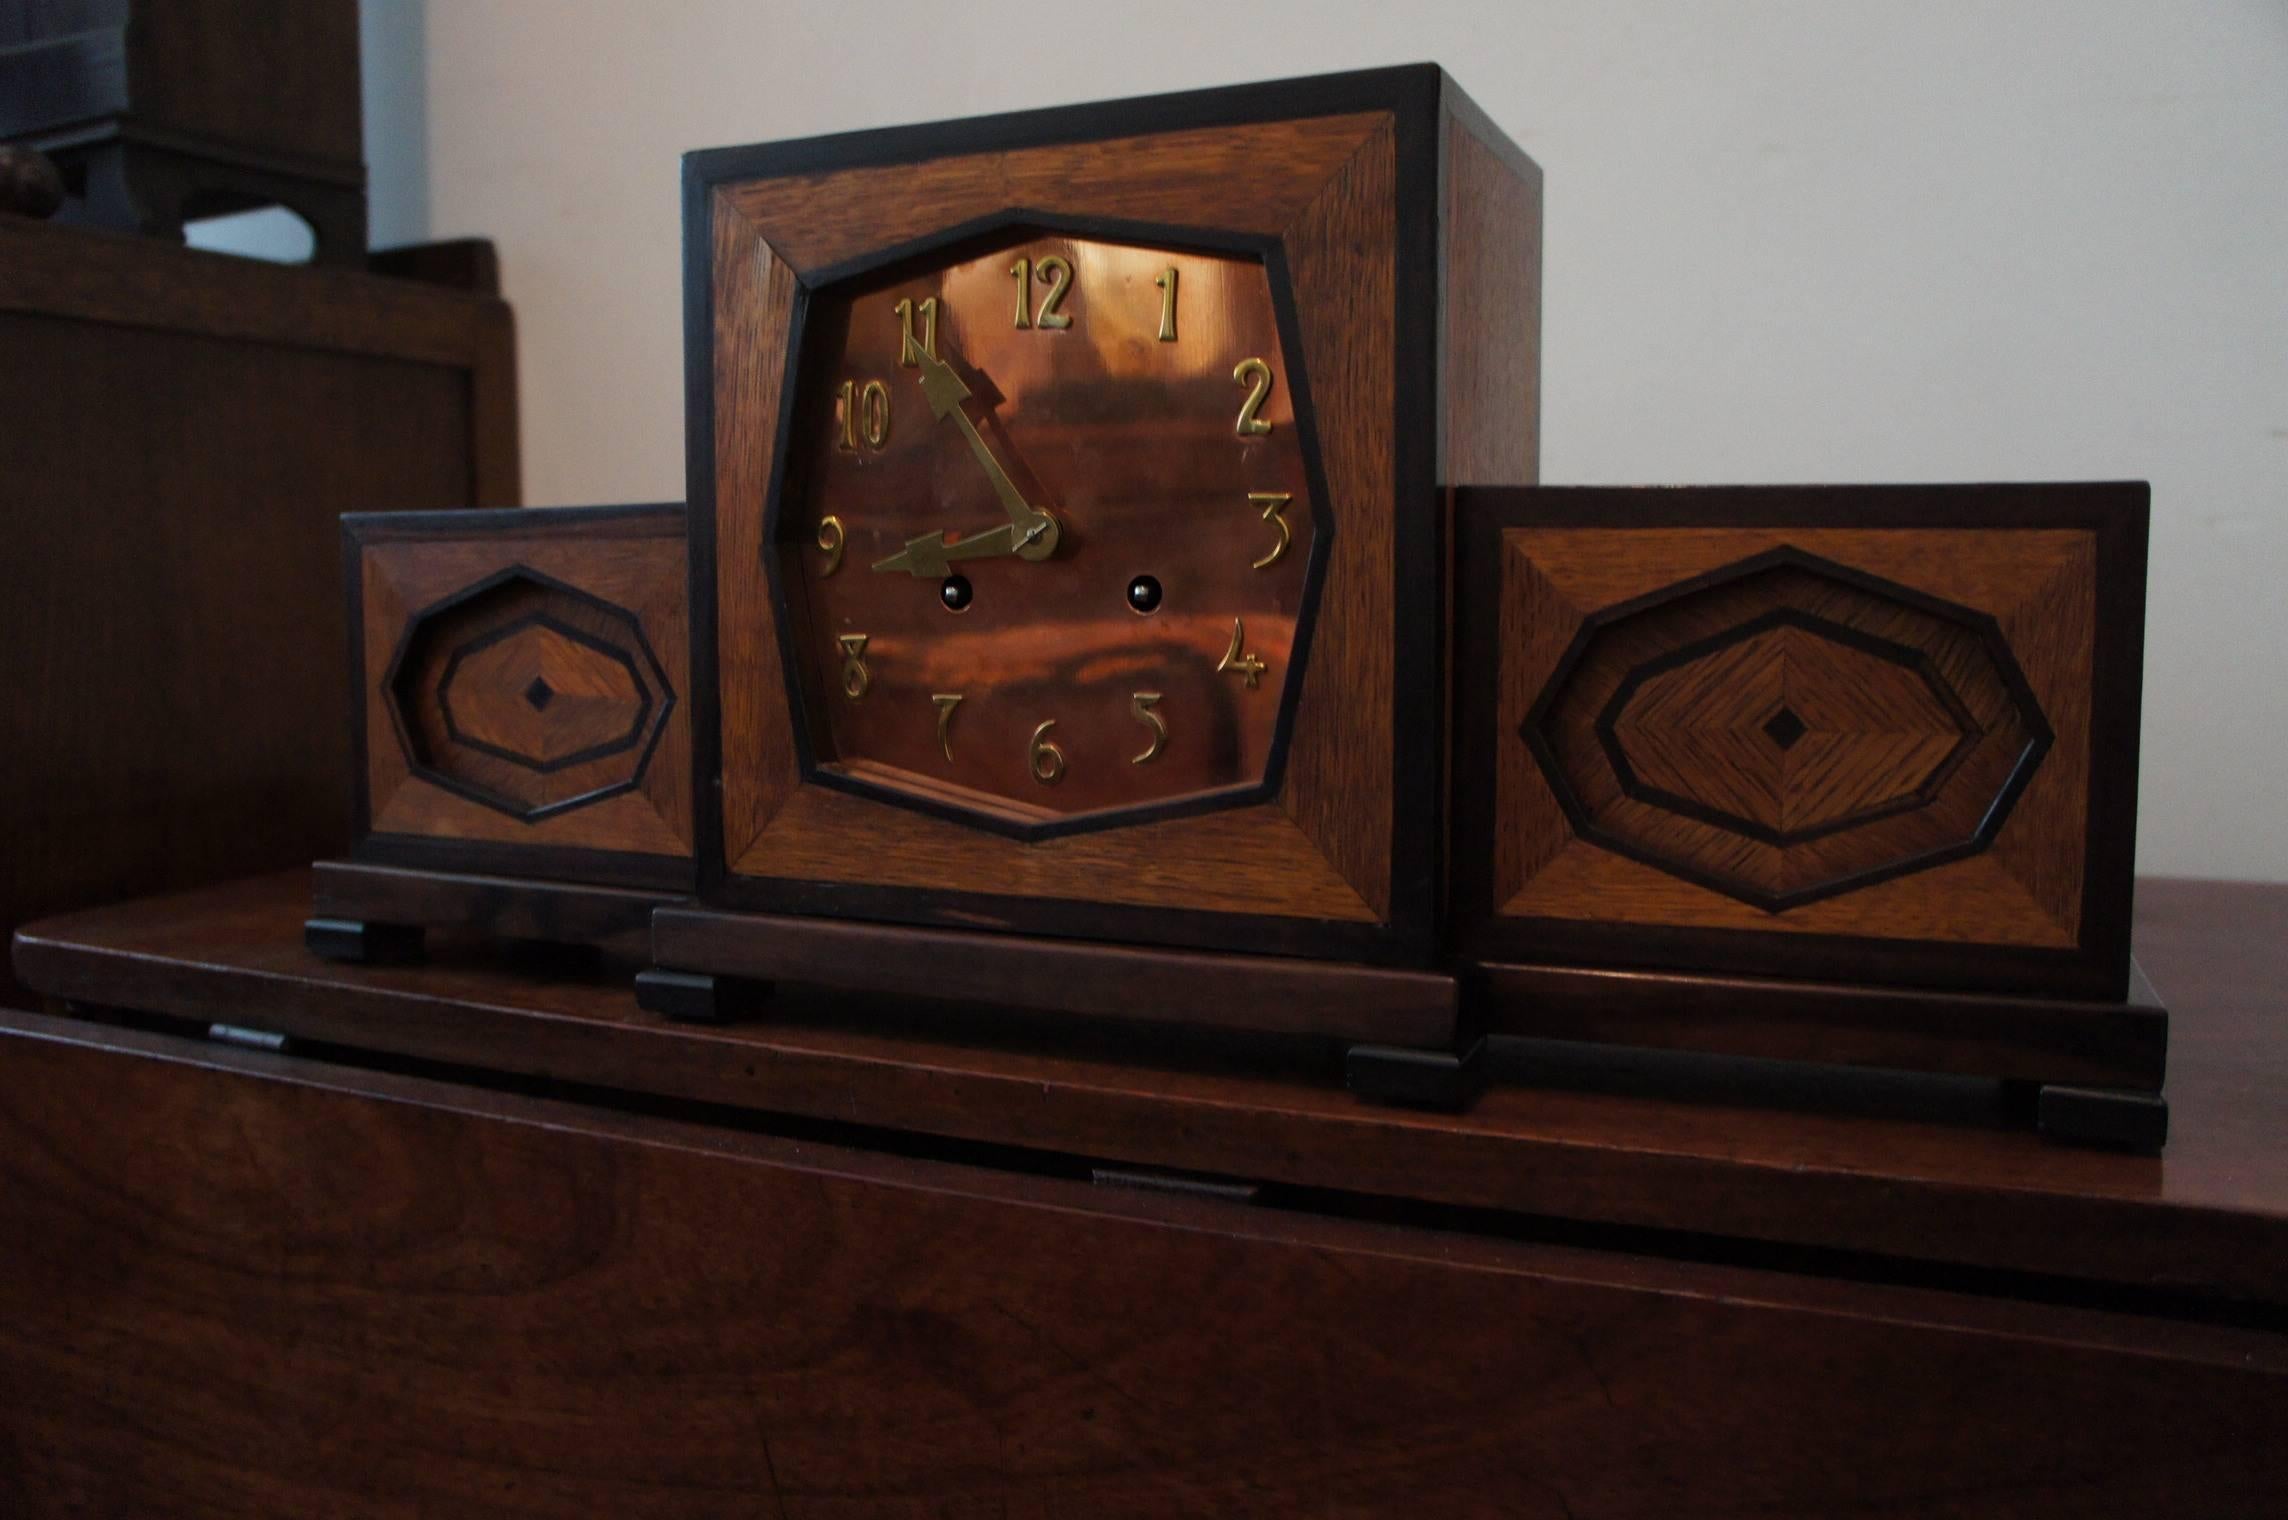 Handcrafted, geometrical design mantel clock.

This hand-crafted mantel clock from the 1920s is exceptional both in terms of design and execution. The many layers in the depth of the design are accentuated by the marquetry inlay of oak and macassar